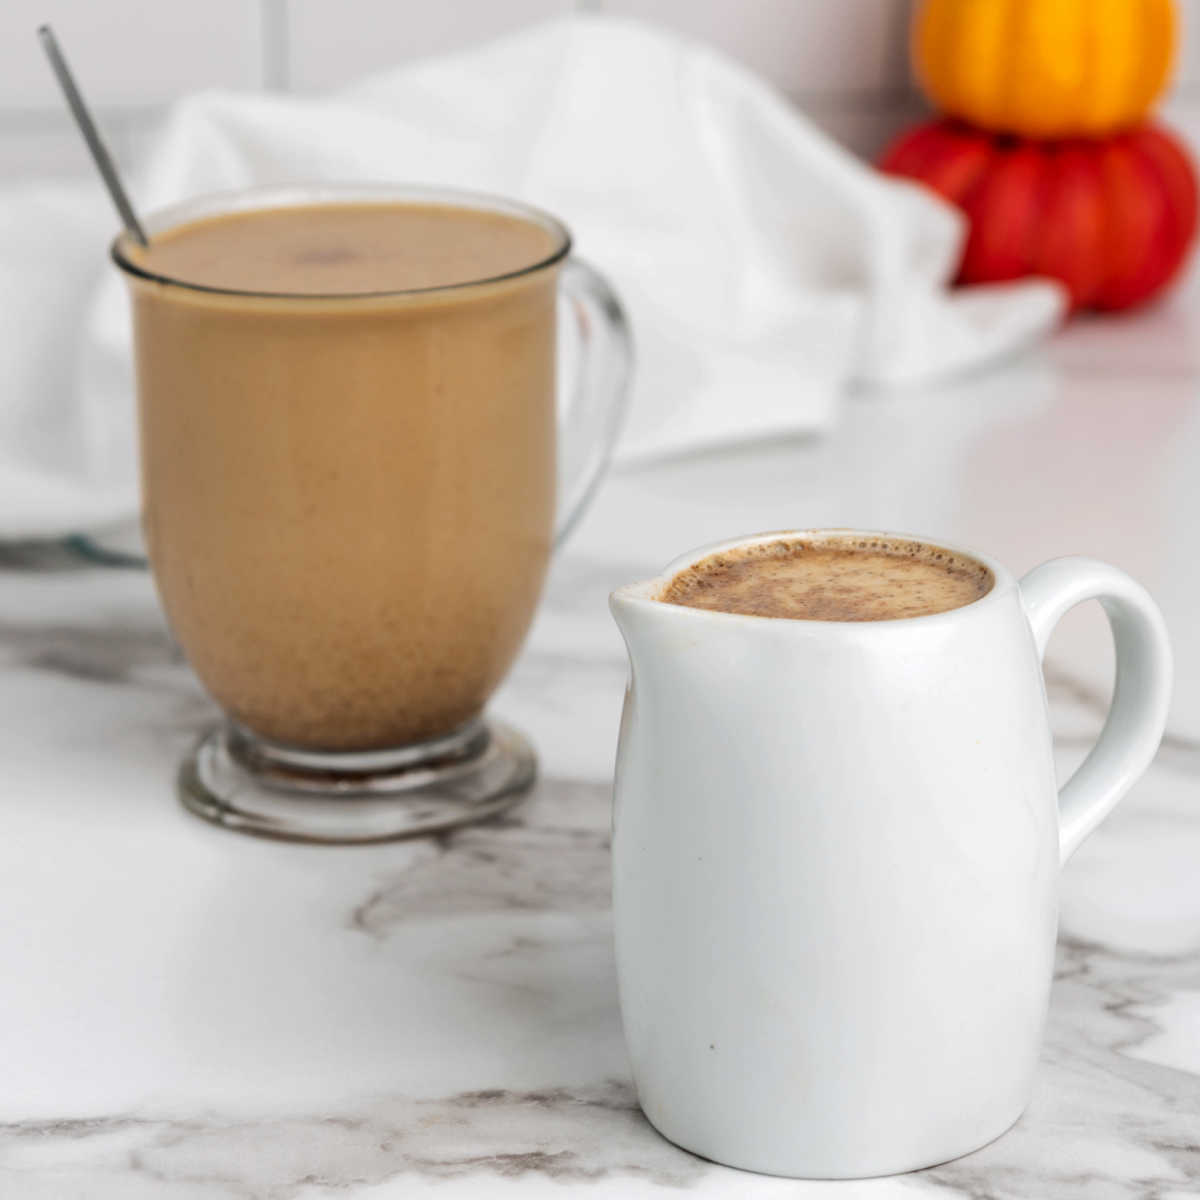 Mug of coffee with pumpkin spice creamer in it next to a small pitcher with additional creamer.